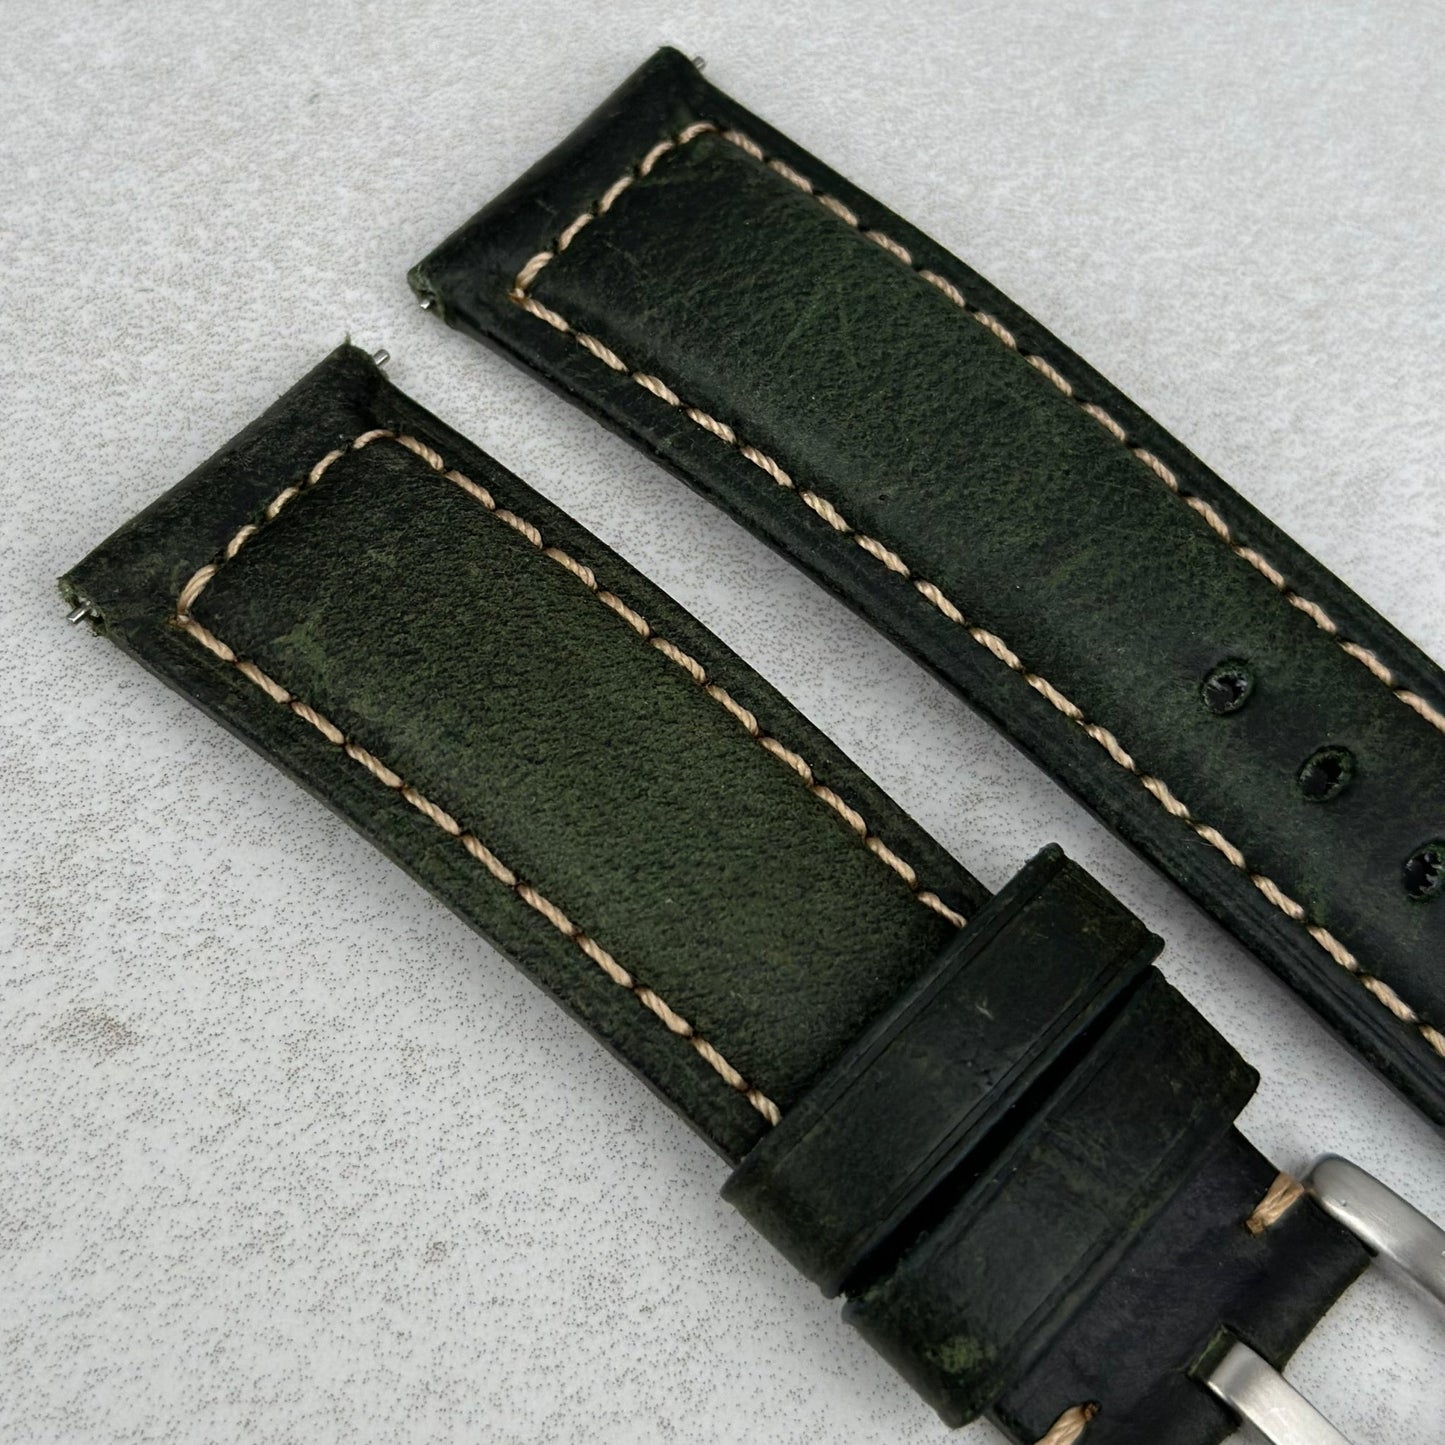 Top of the Berlin Green full grain leather watch strap. Padded leather watch strap. Watch And Strap.